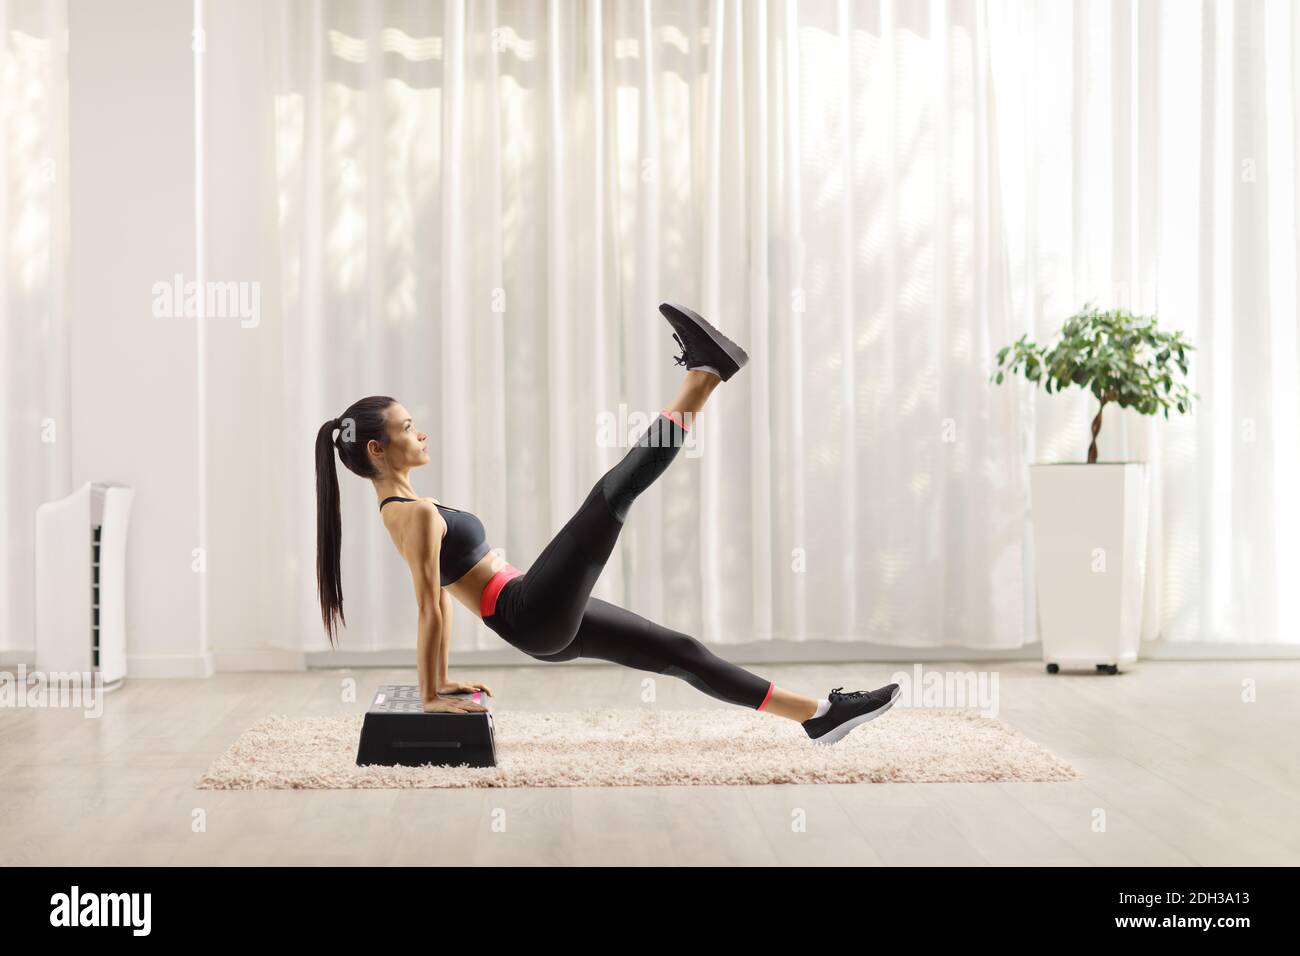 Full length profile shot of a young woman exercising on a step aerobic platform and lifting one leg at home Stock Photo